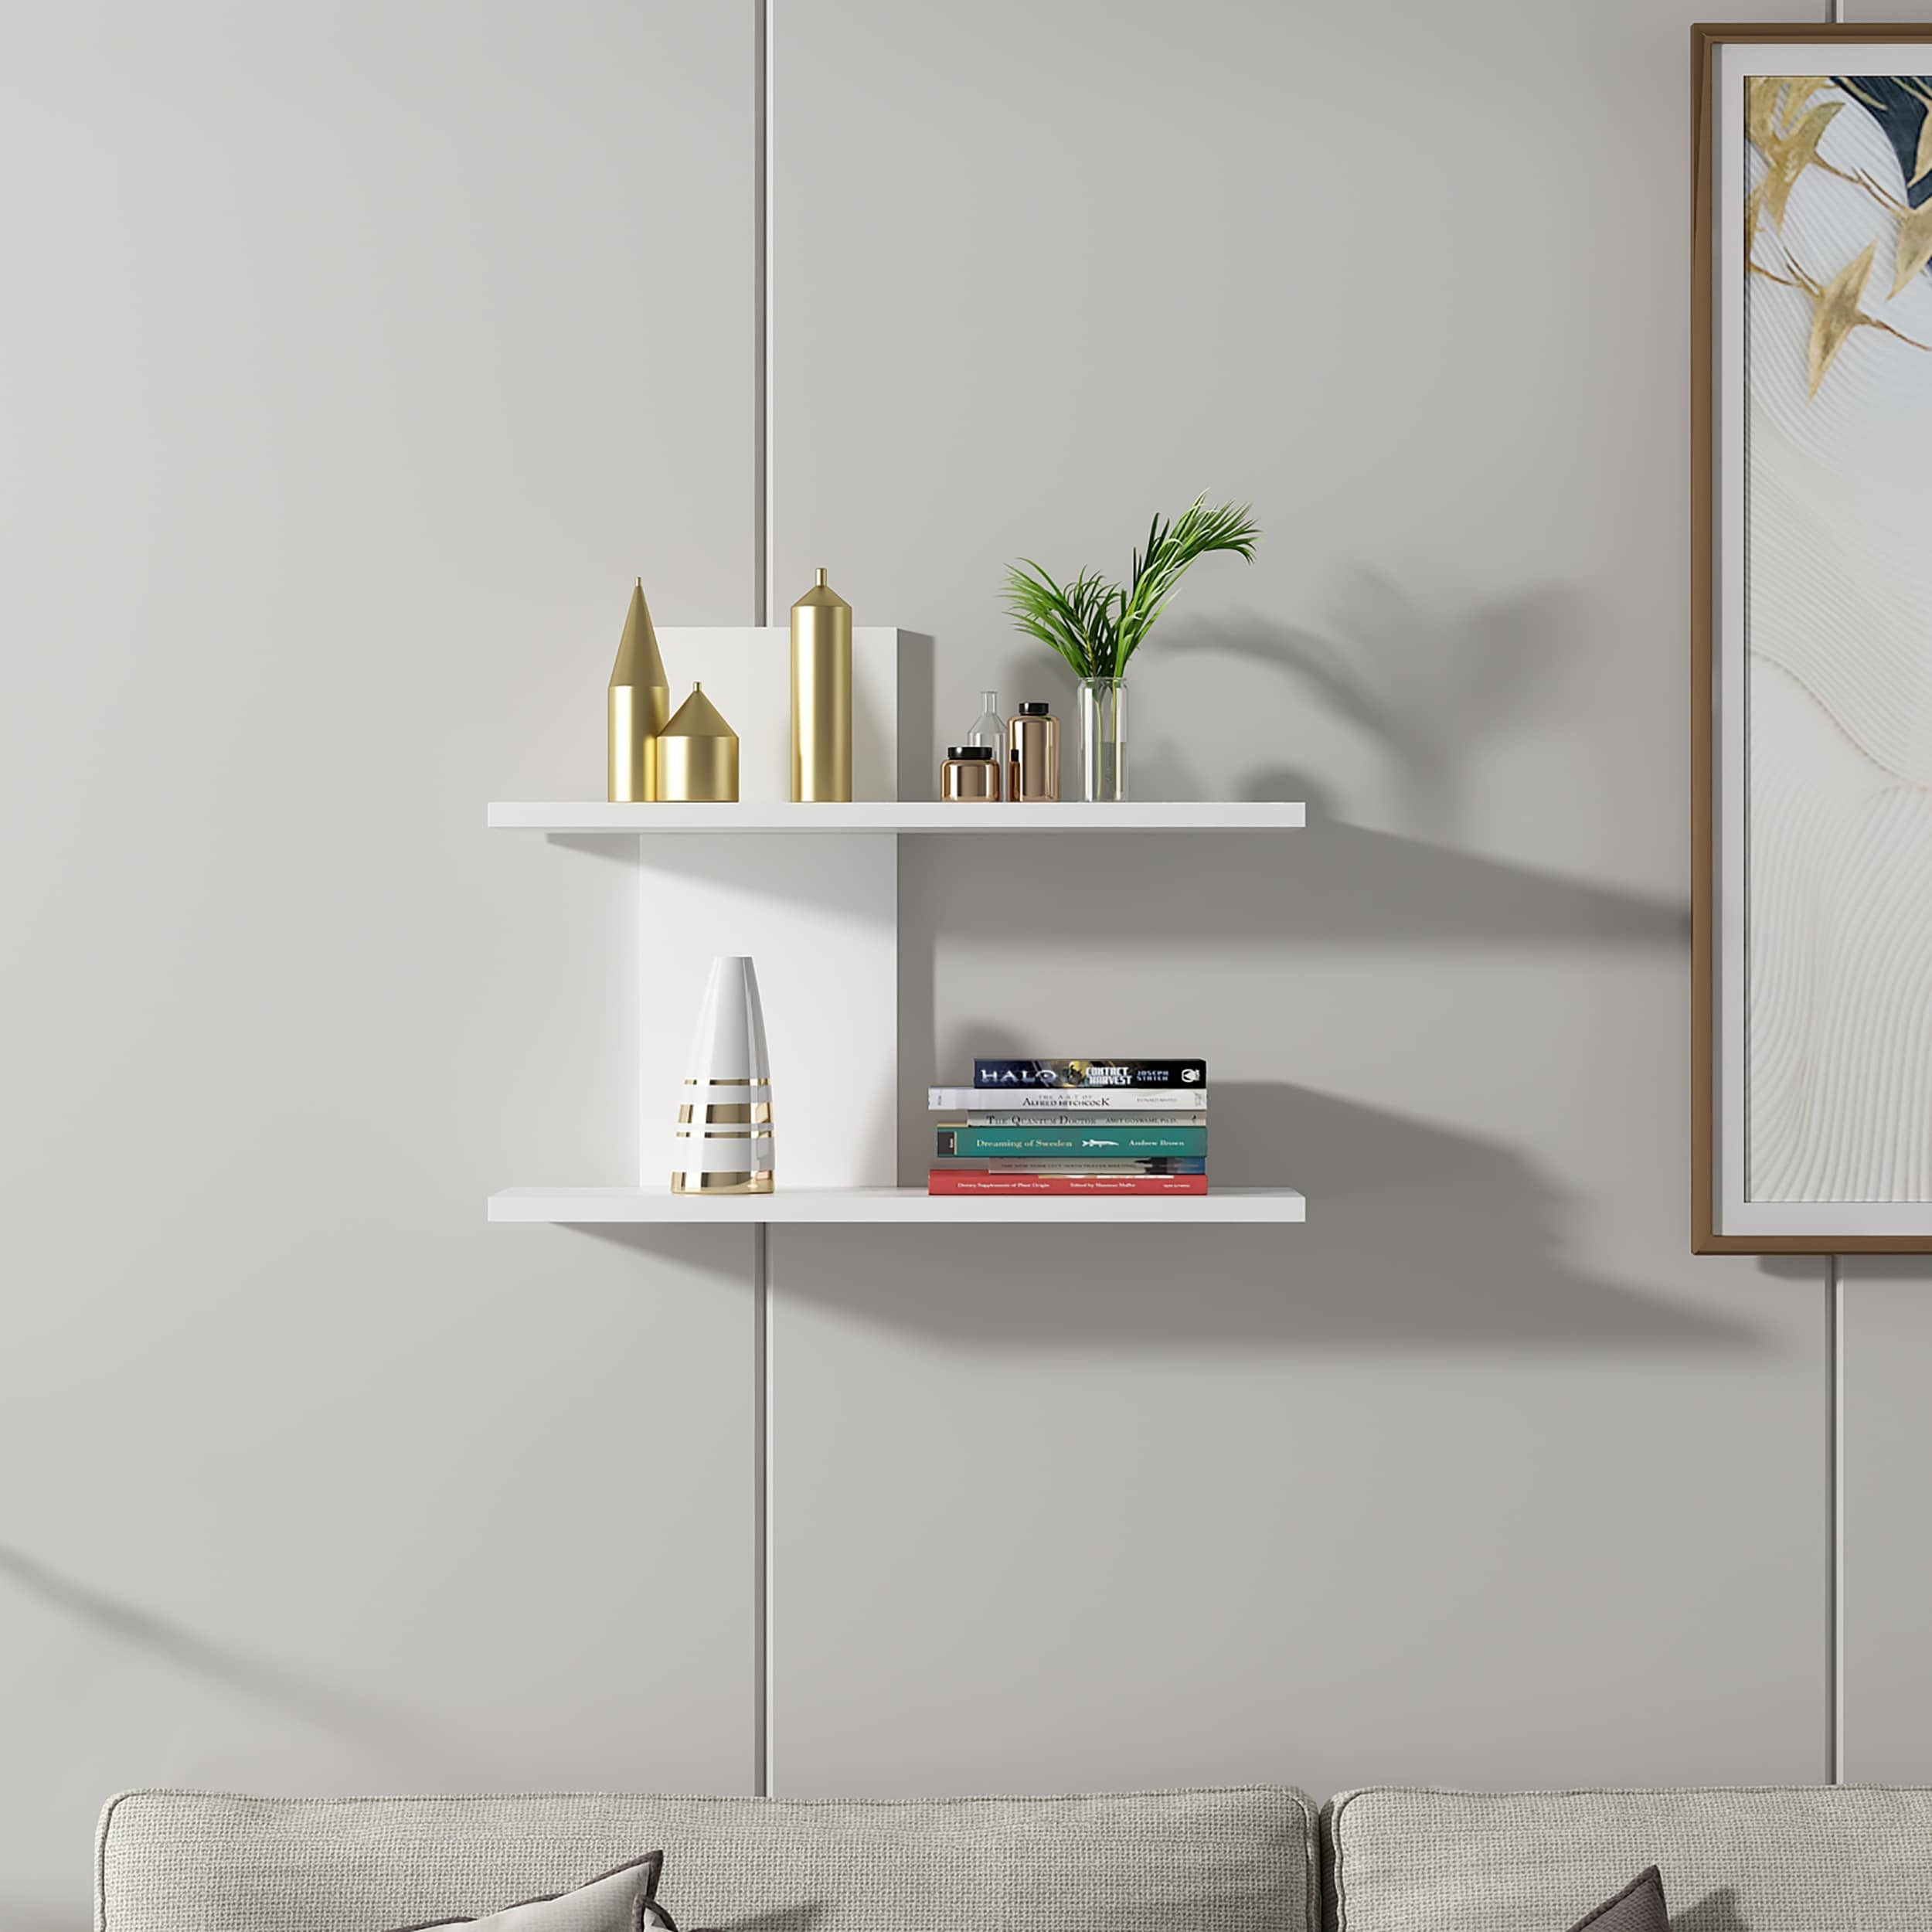 https://ak1.ostkcdn.com/images/products/is/images/direct/0f789b56966f4d00e4613e2f7af419d0c149585d/Walter-Floating-Wall-Shelf.jpg